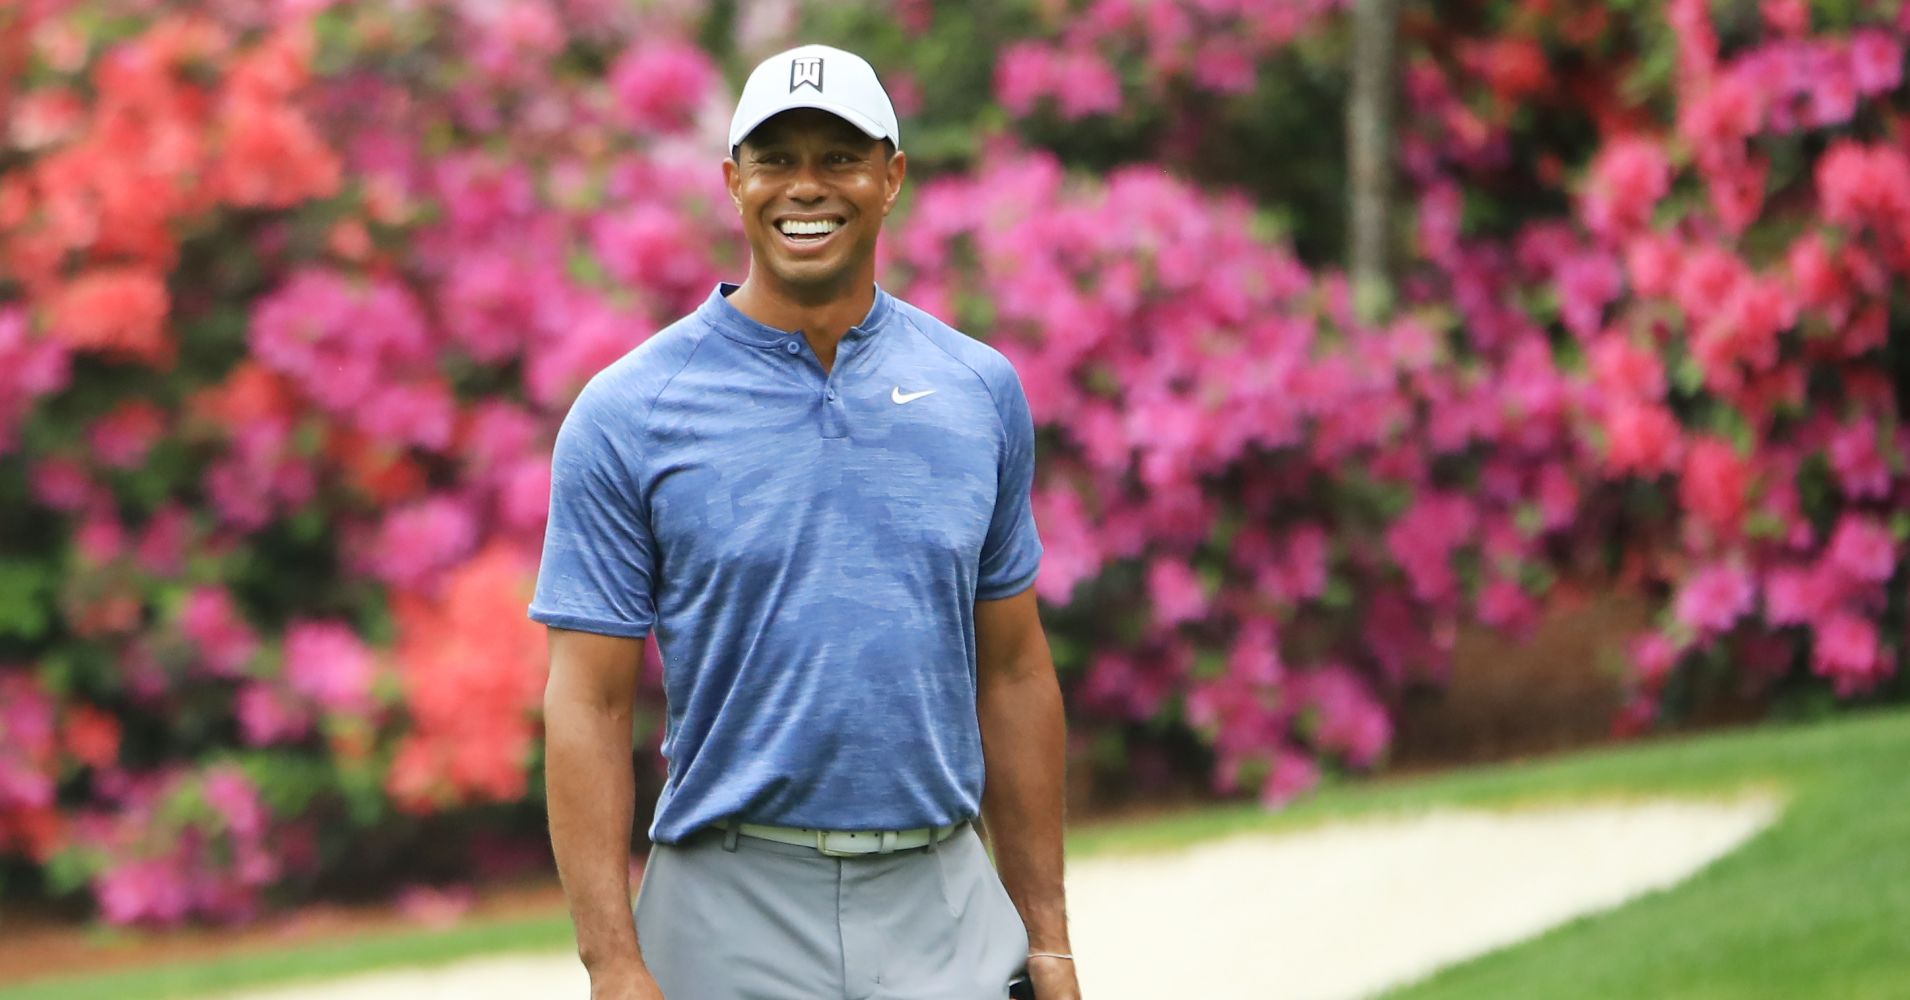 Tiger Woods during a practice round prior to The Masters at Augusta National Golf Club on April 08, 2019